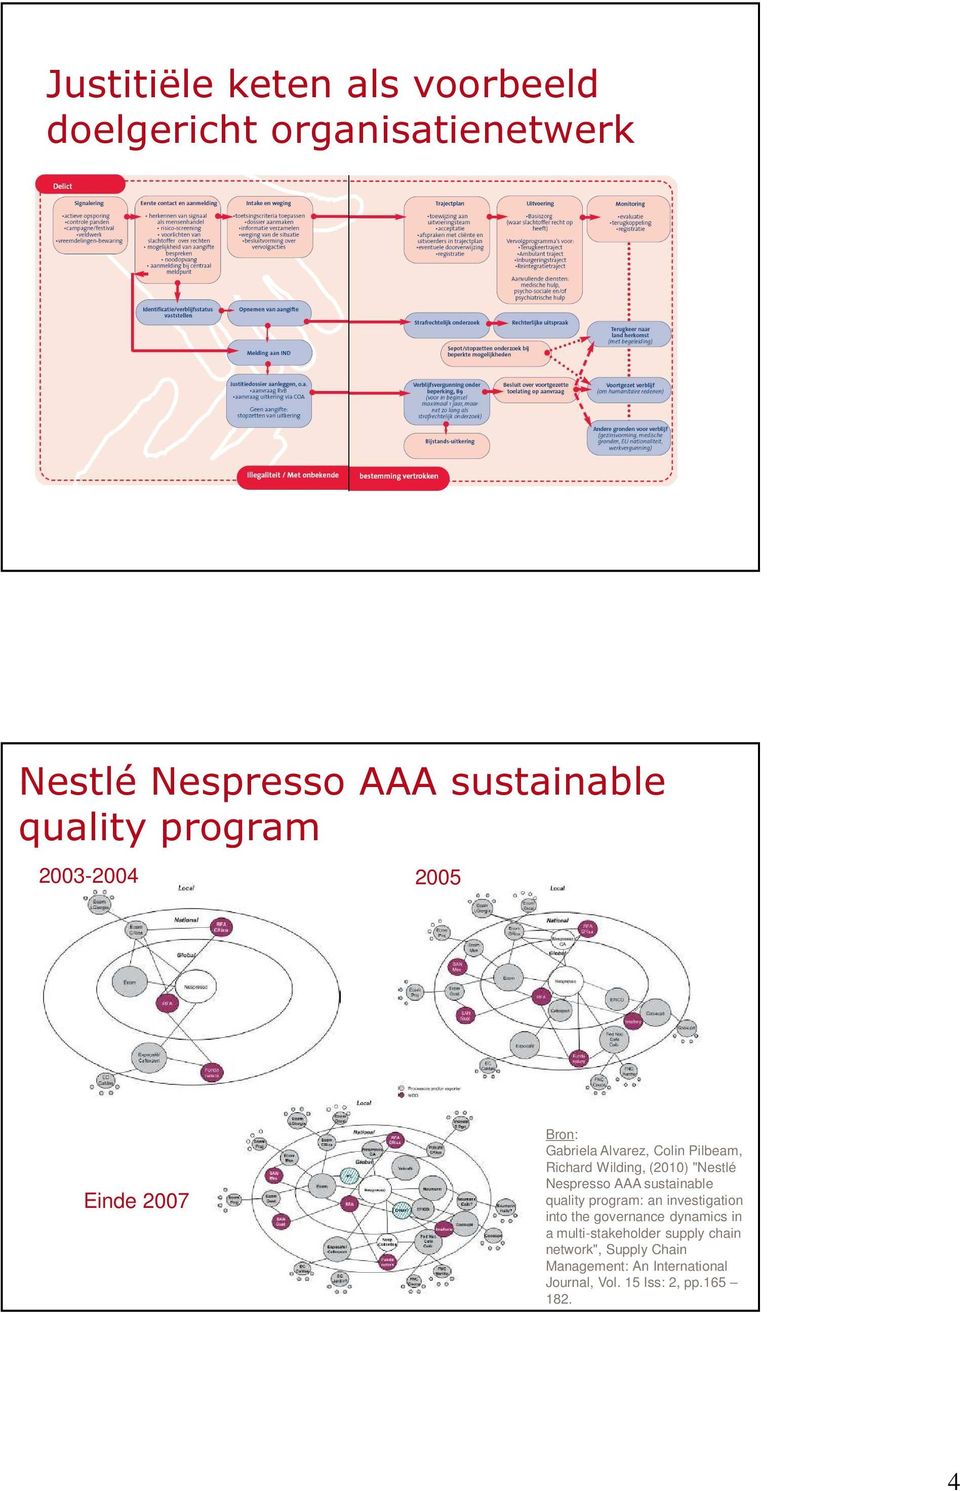 Nespresso AAA sustainable quality program: an investigation into the governance dynamics in a